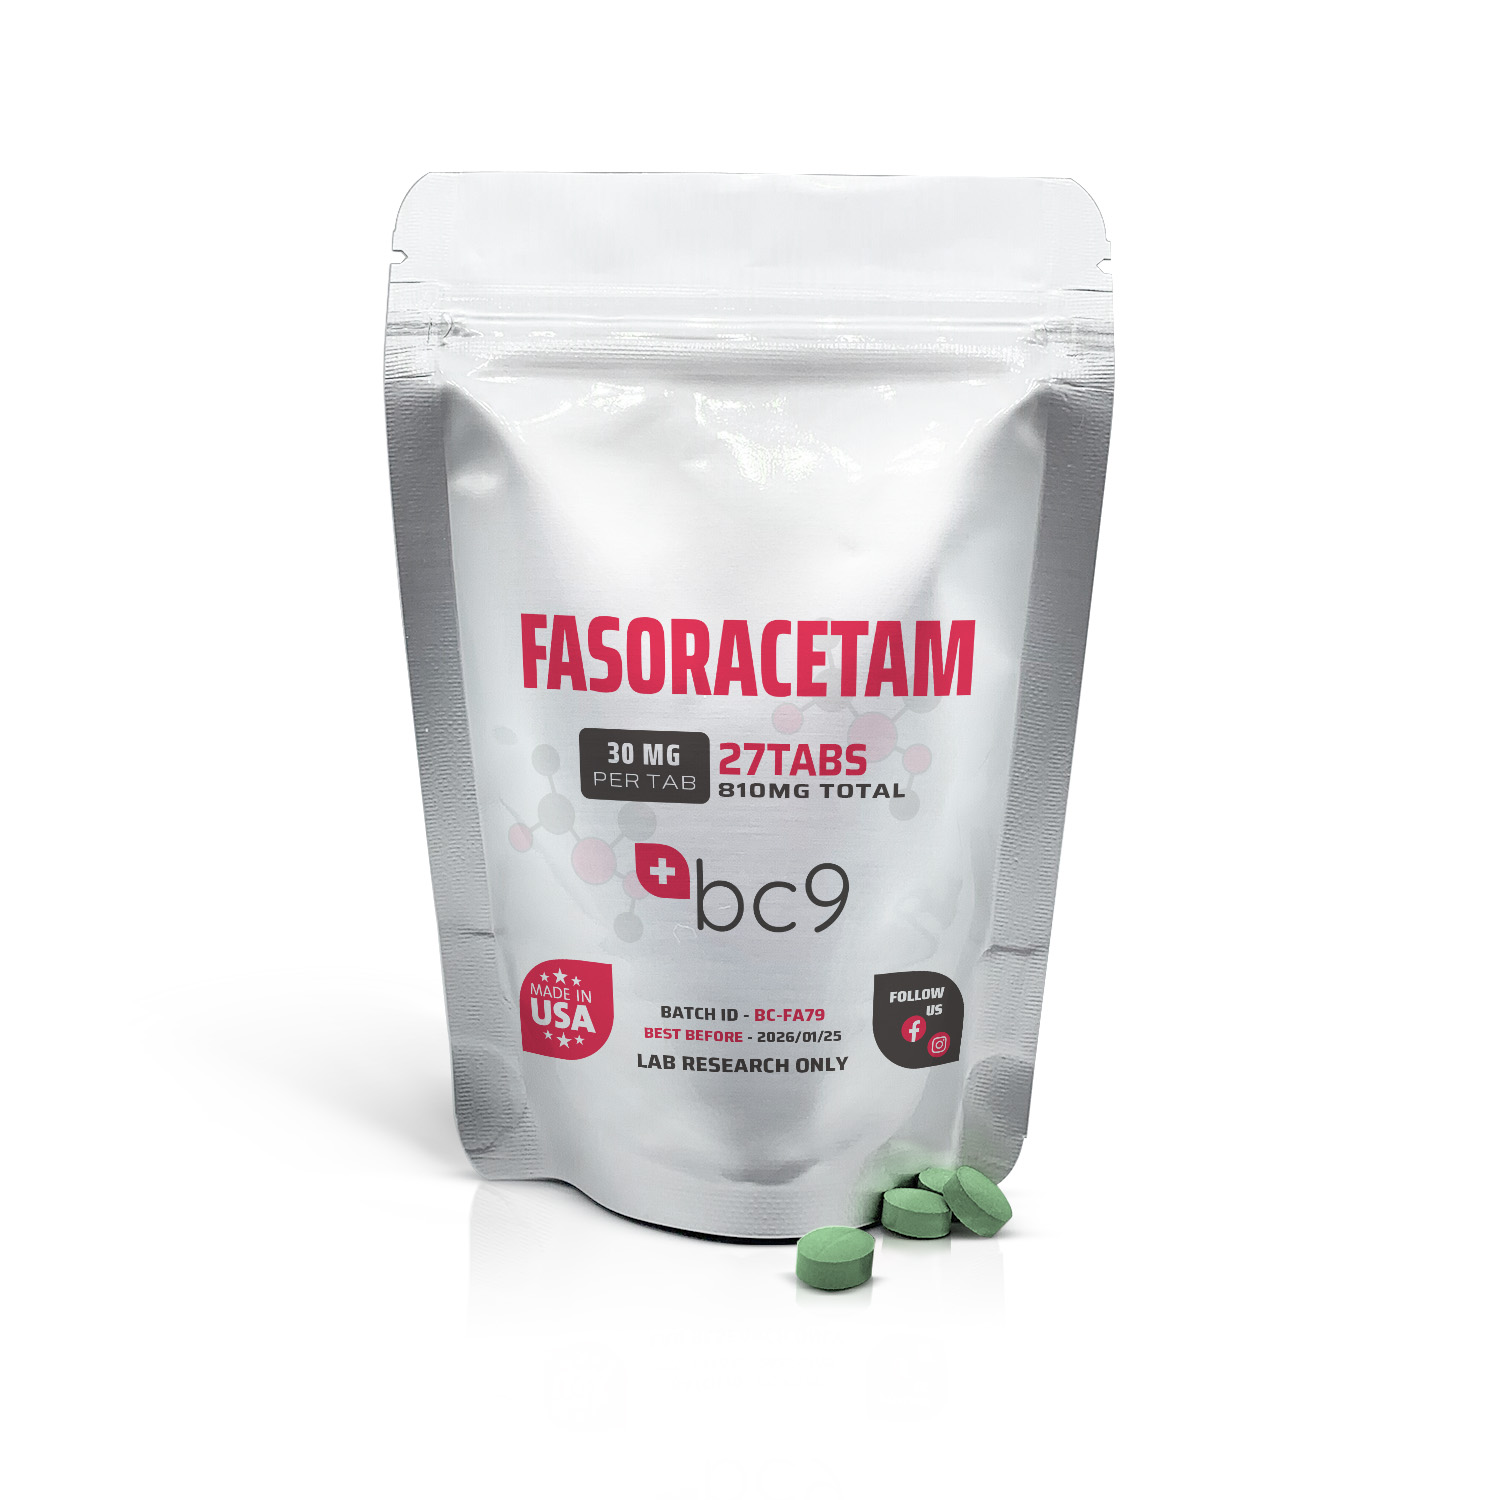 Fasoracetam Tablets For Sale | Fast Shipping | BC9.org